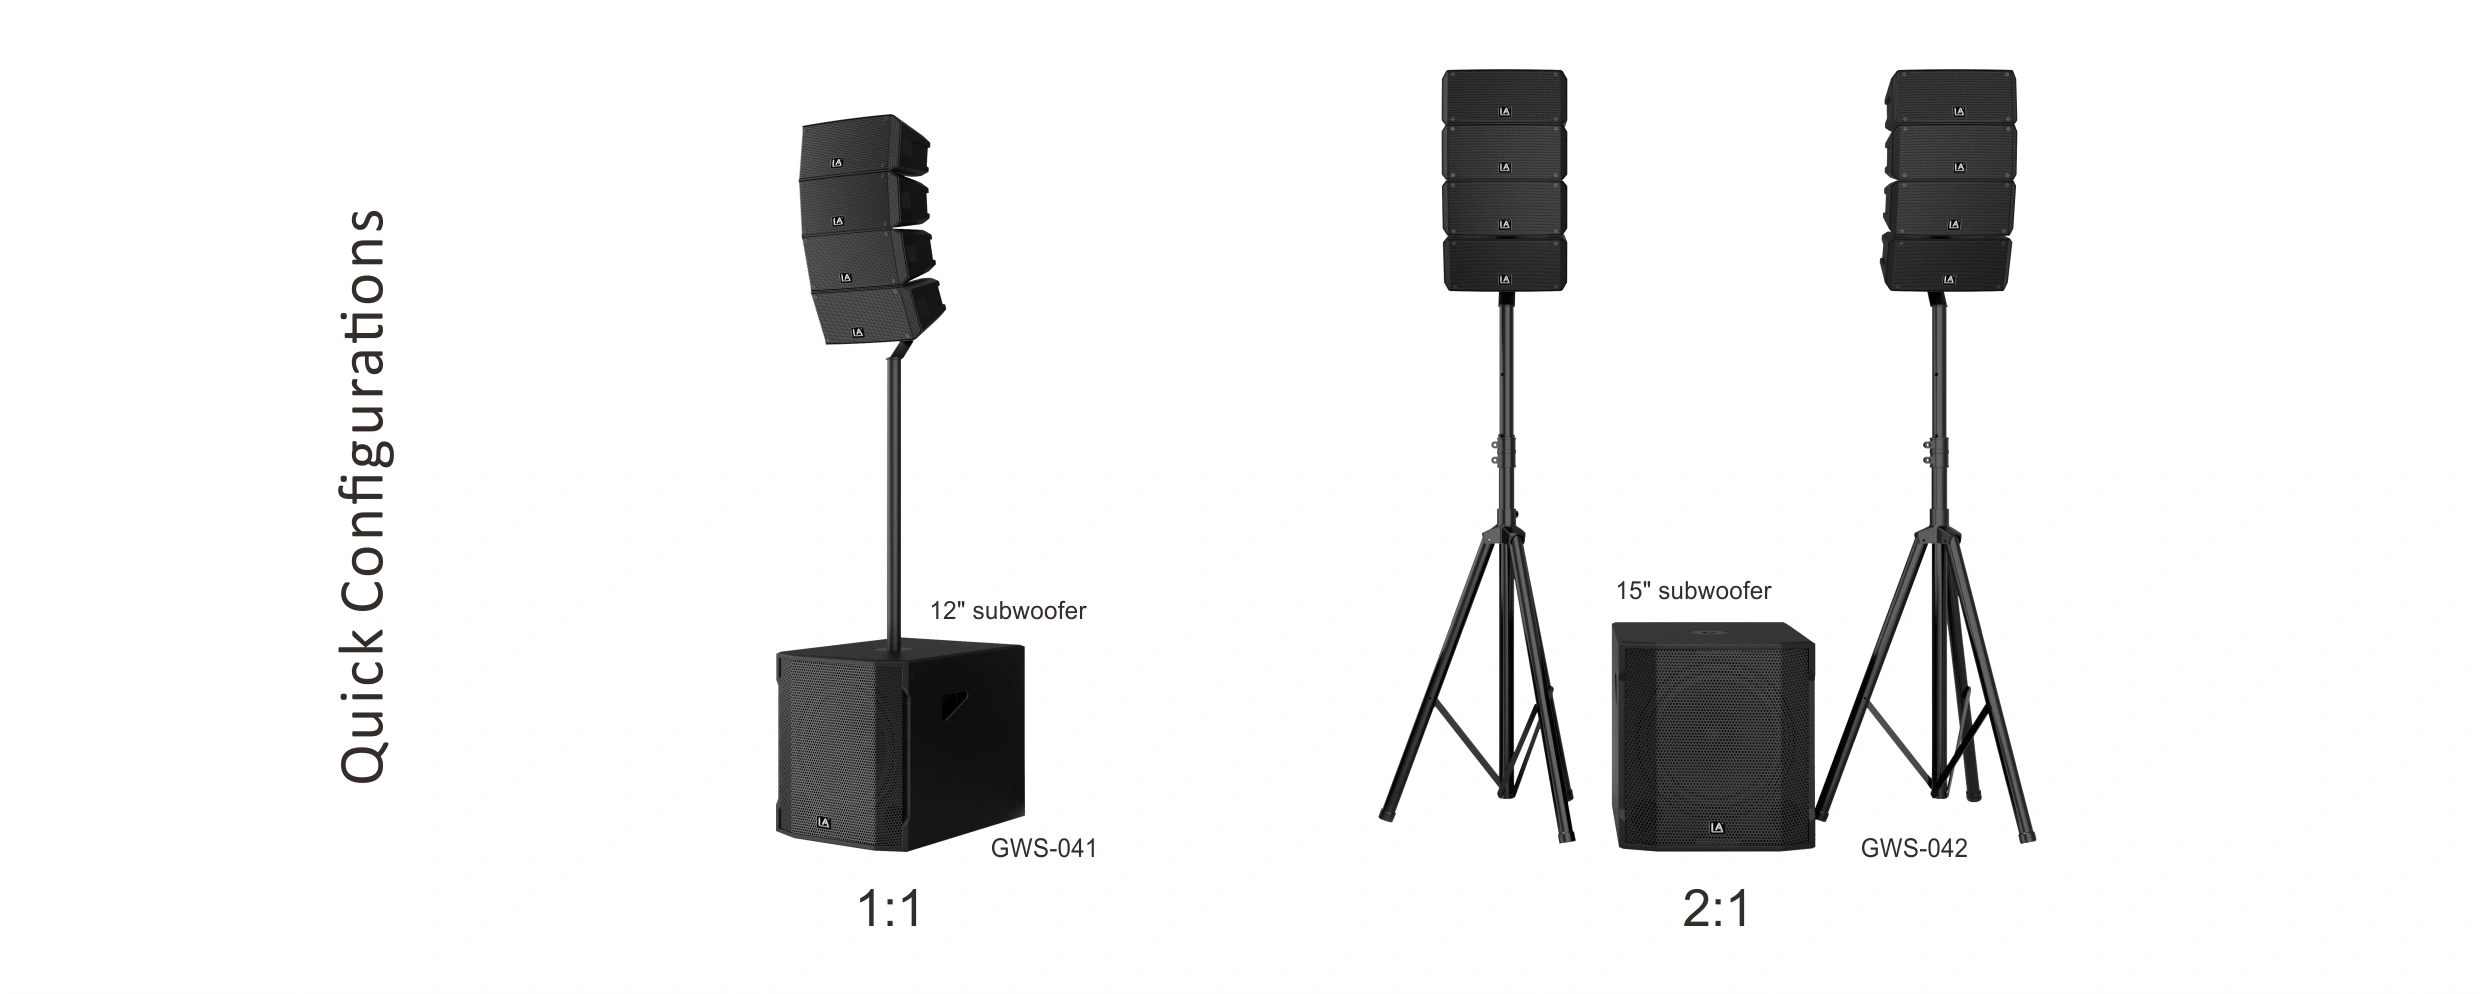 compact line array systems,compact line array system,array compact,ultra compact line array